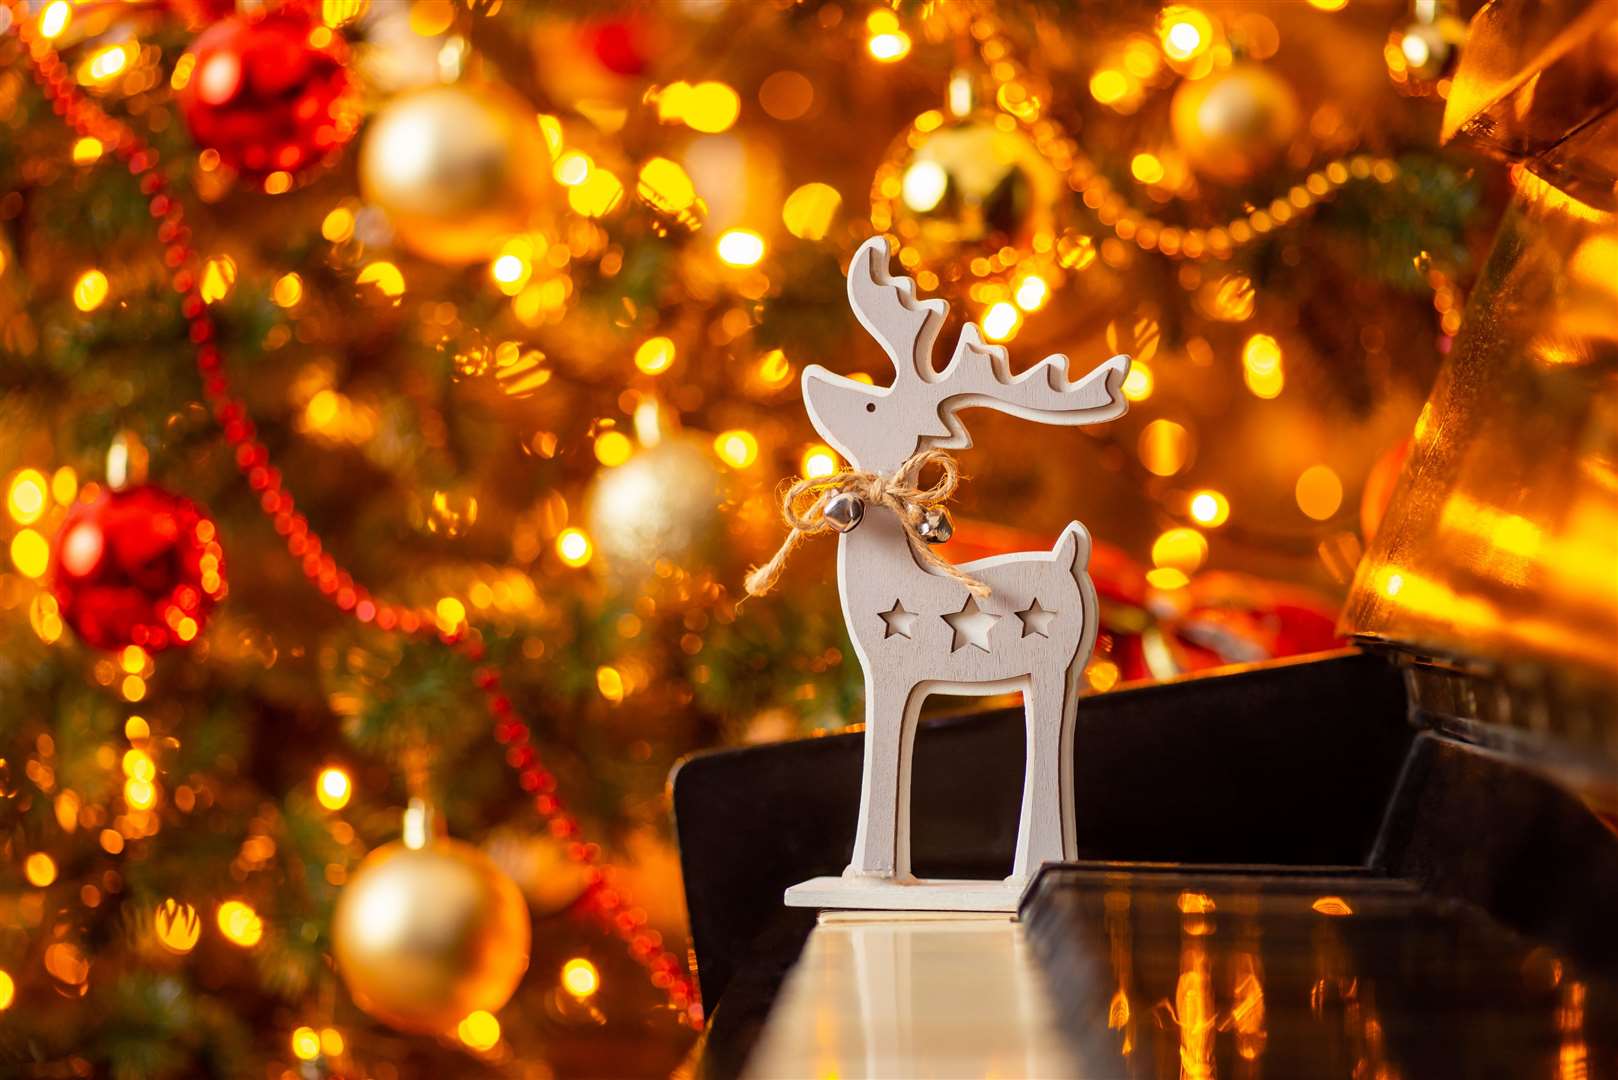 Are you Christmas decorations still up at home? Image: iStock.